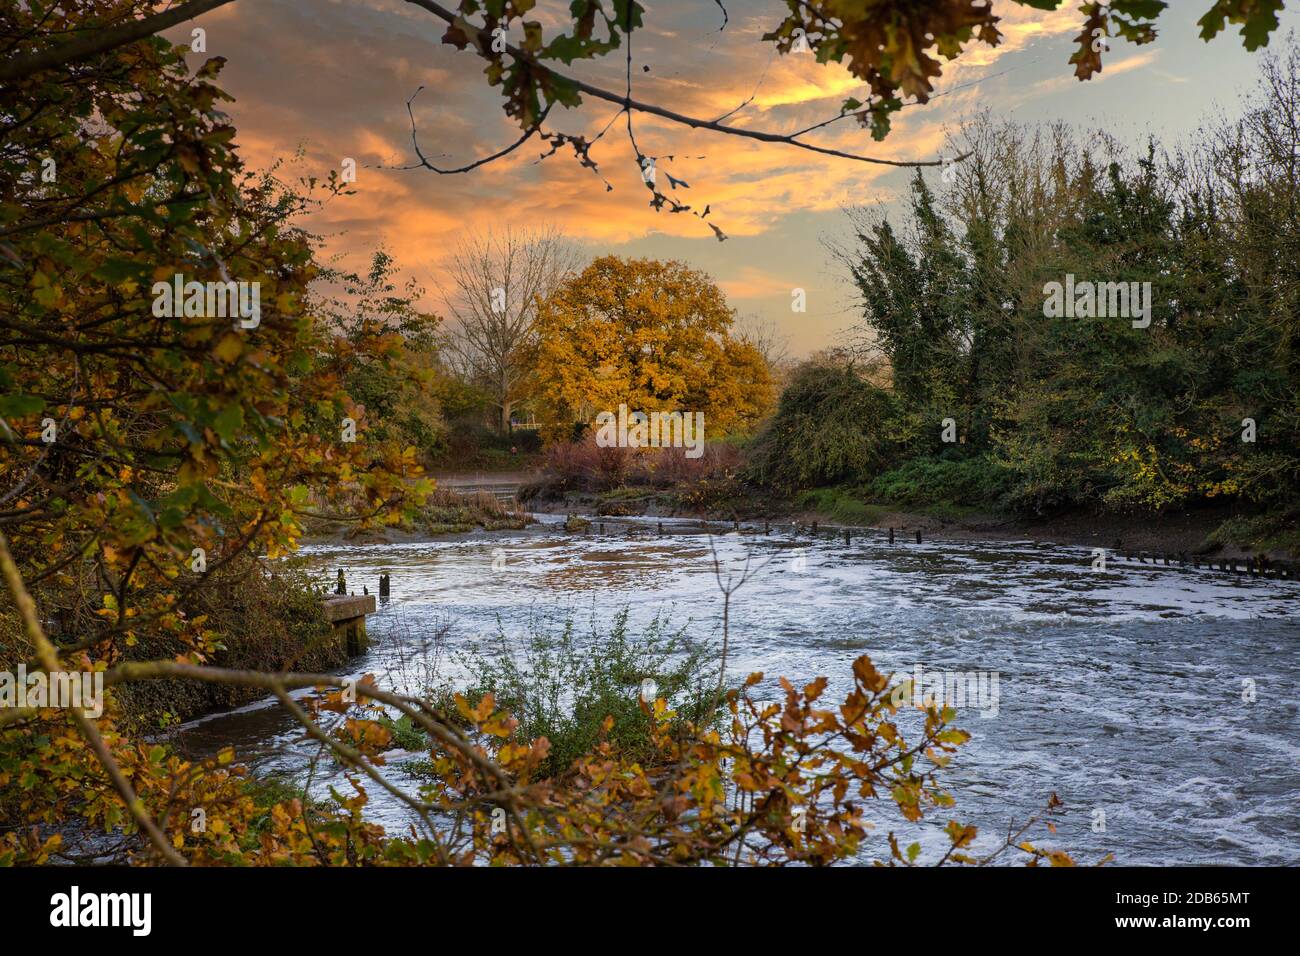 A beautiful autumnal scene at Beeliegh Falls. Beeliegh Falls are located in Maldon, Essex in the UK. and join the River Blackwater and River Chelmer. Stock Photo